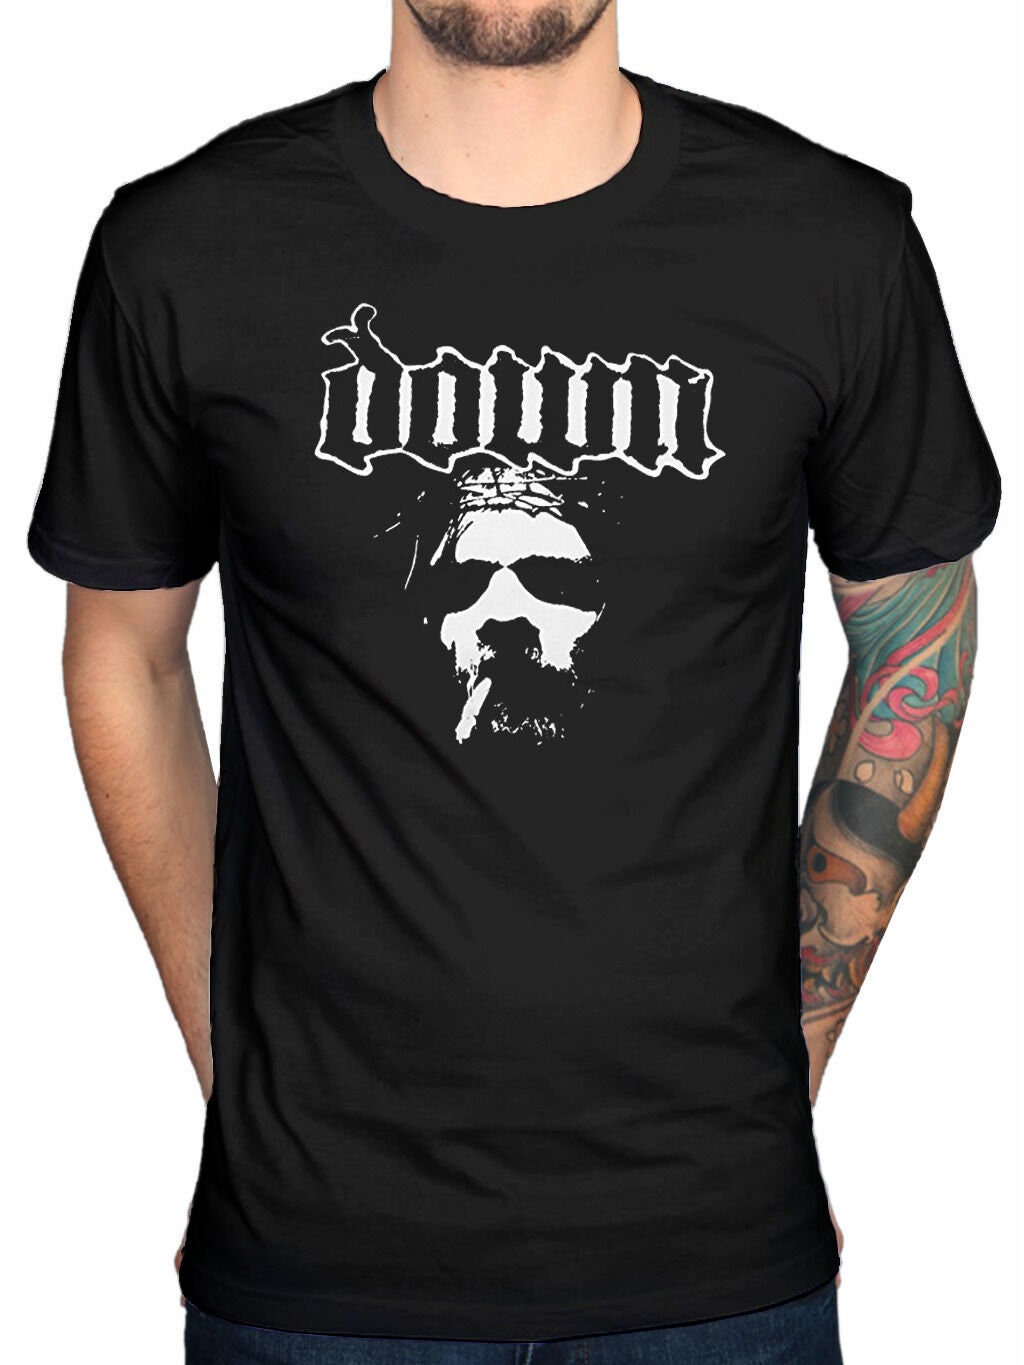 Discover Down Face Official Tee T-Shirt Mens Unisex